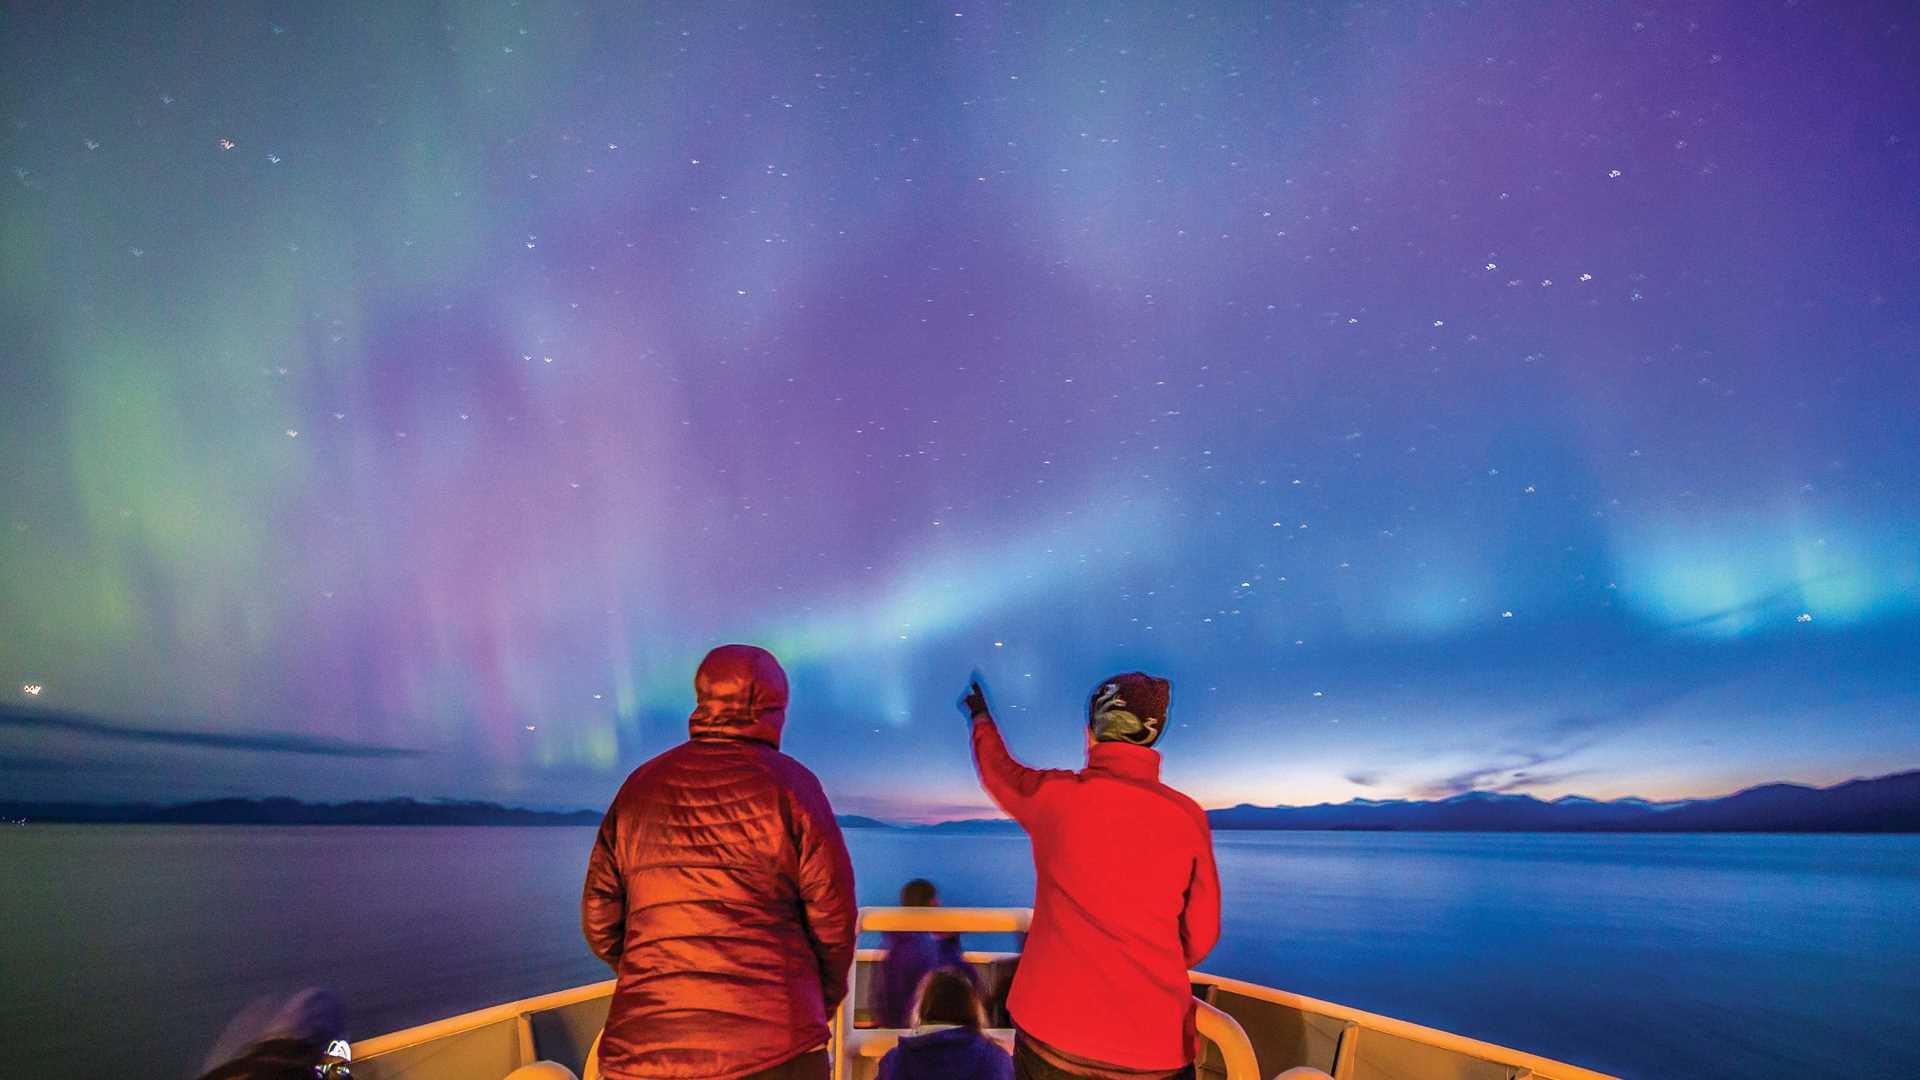 https://cdn.expeditions.com/globalassets/expedition-stories/what-to-expect-aurora-borealis/aurora-borealis-main-nolan.jpg?width=1920&height=1080&mode=crop&scale=none&quality=50